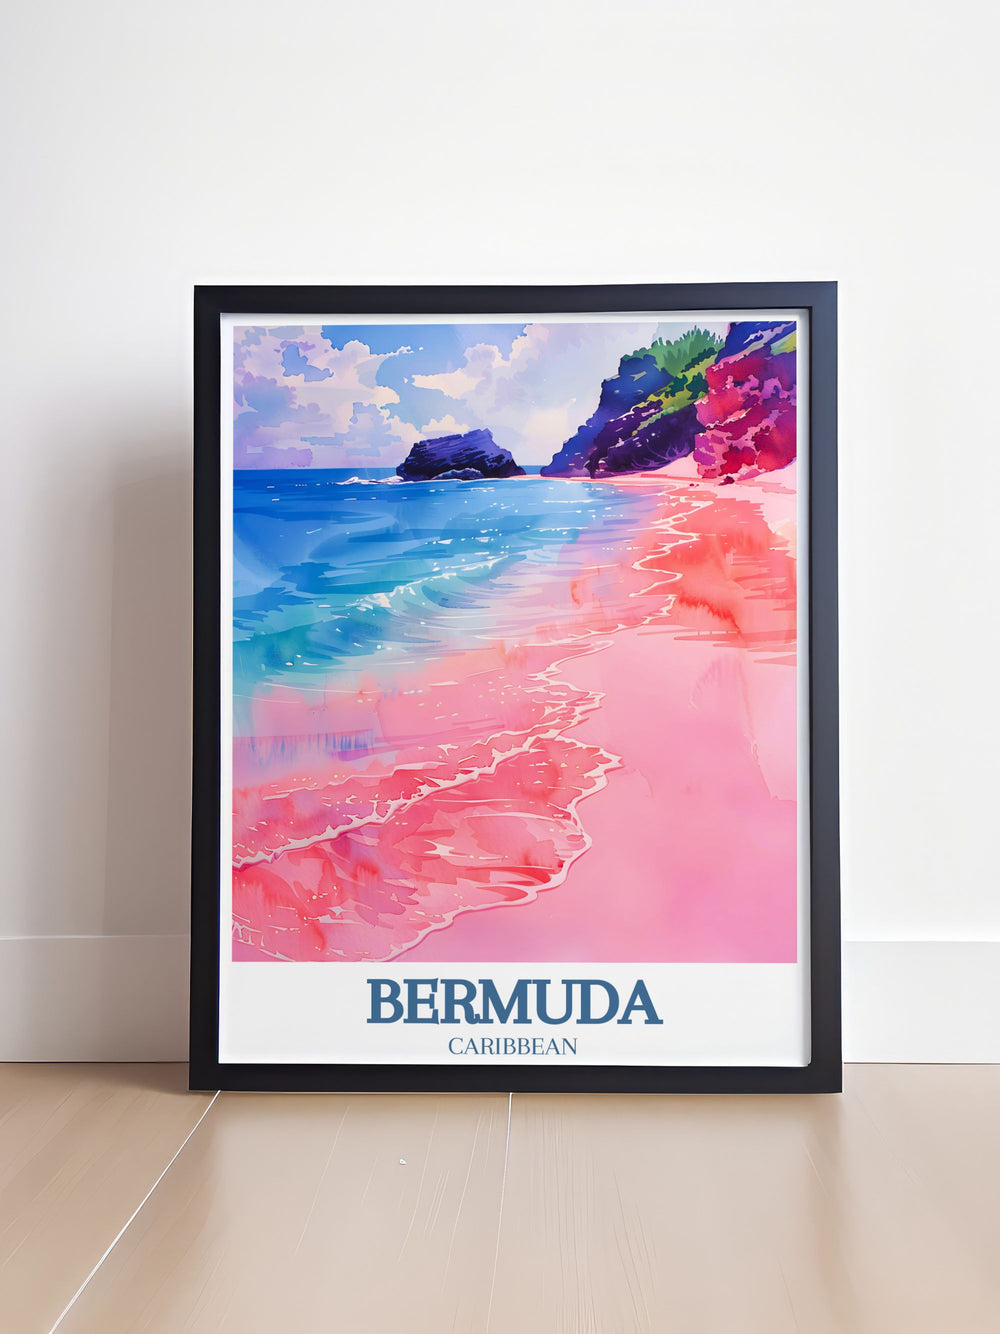 Detailed digital download of Bermudas iconic Horseshoe Bay Beach and peaceful Warwick Long Bay, ideal for any art collection or as a memorable travel keepsake. Enhances your home with Bermudas island charm.